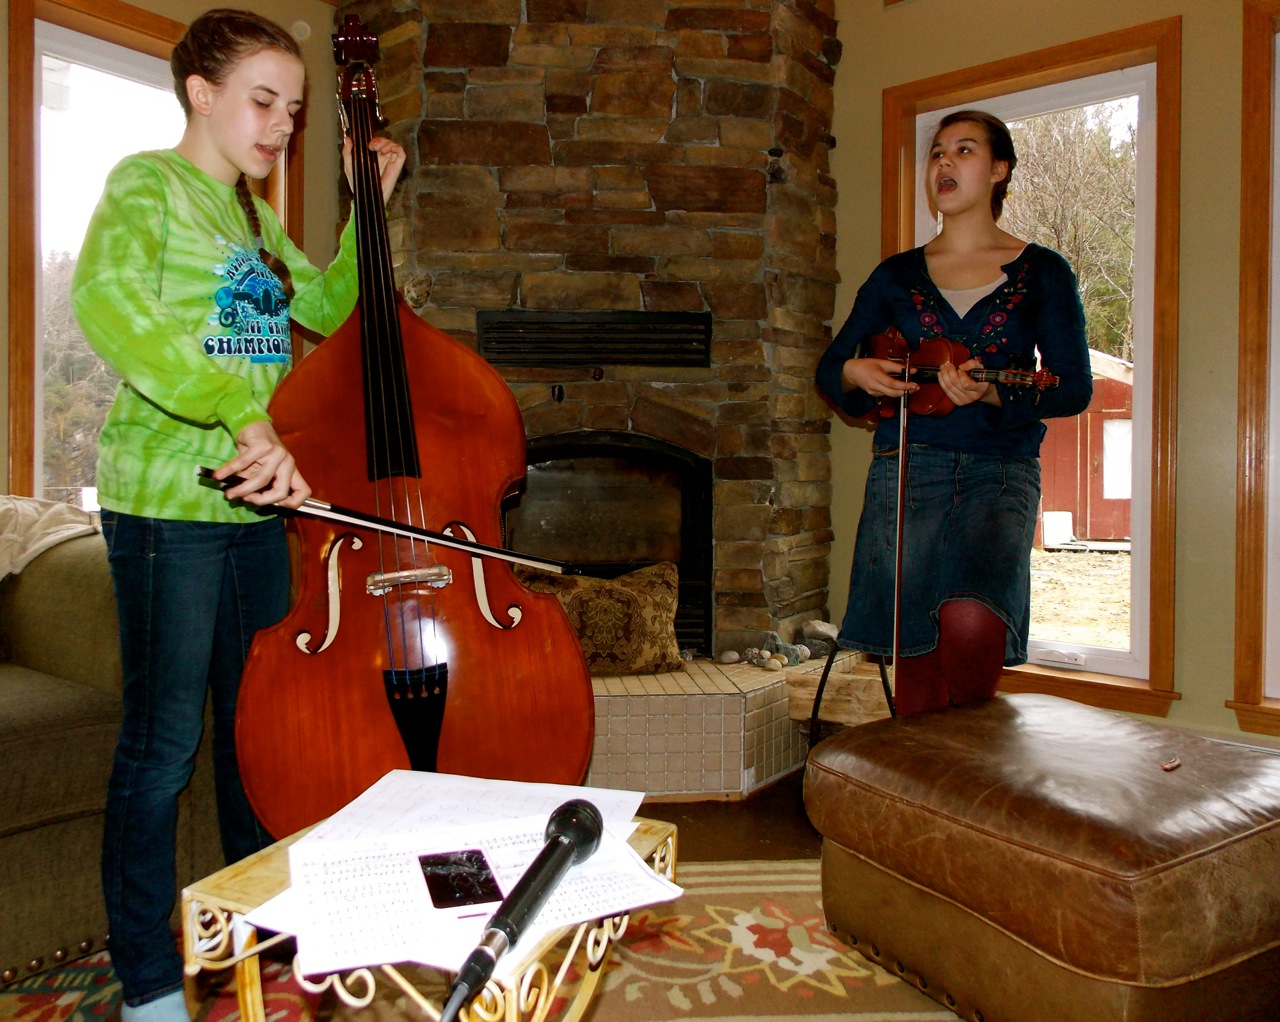 Kelsa Sperl, 15, sings while Erin Pfundt, 14, accompanies her on the bass. (Photo by Angela Denning/KFSK)